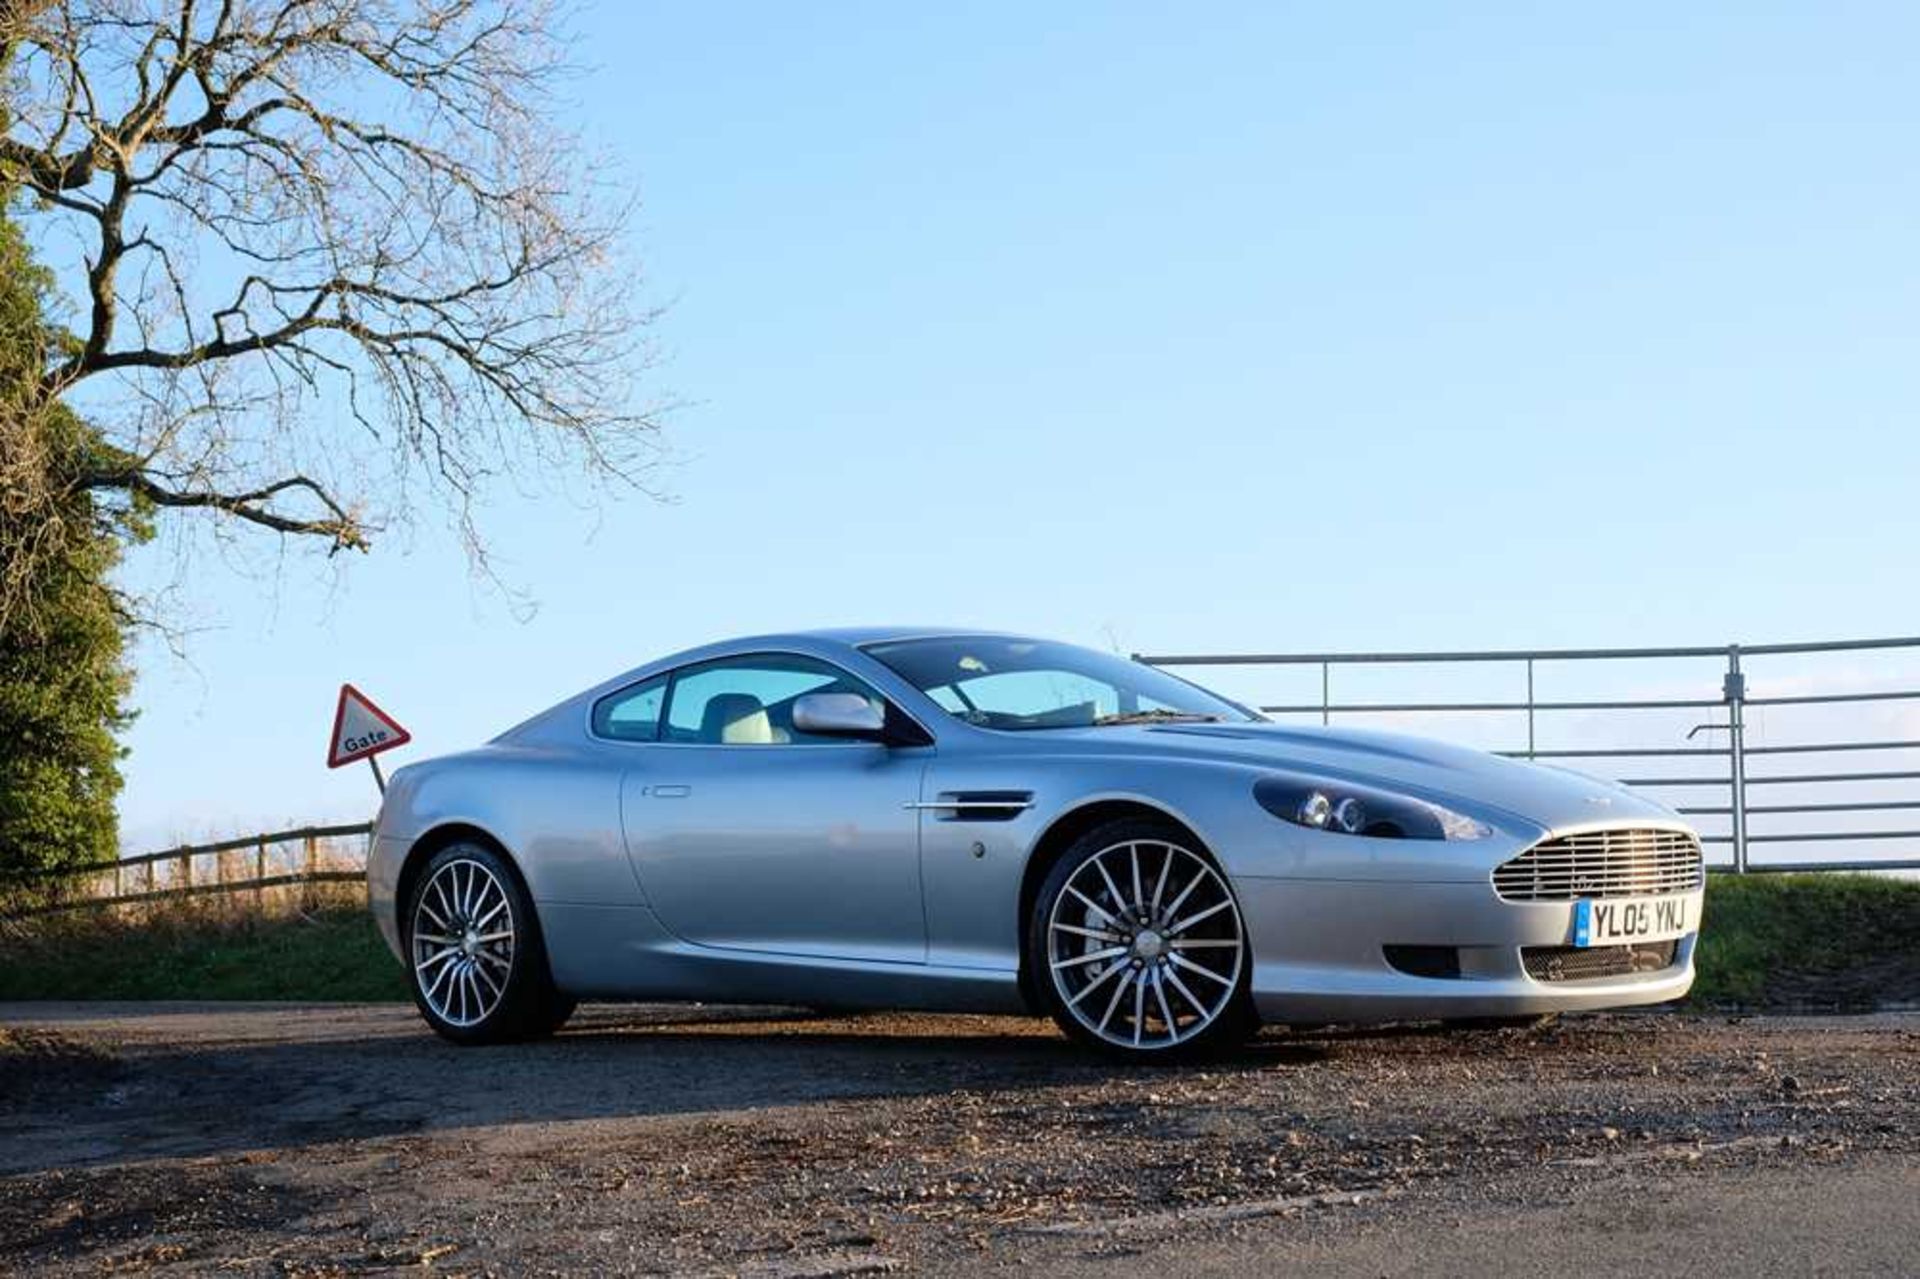 2005 Aston Martin DB9 c.25,000 from new and 4 former keepers - Image 3 of 59